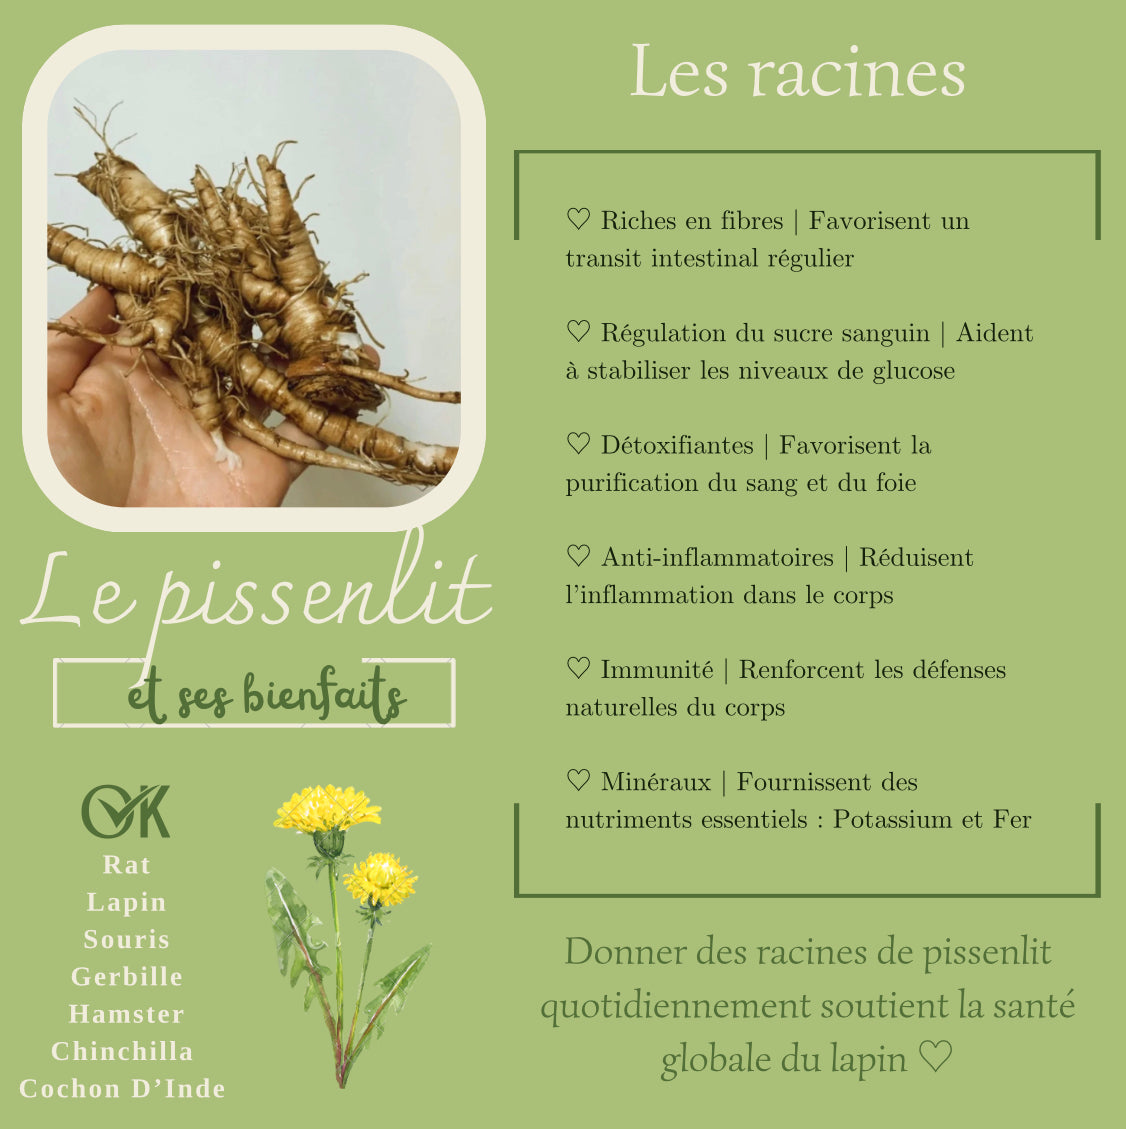 Dandelion root 100% natural - Product of Quebec 